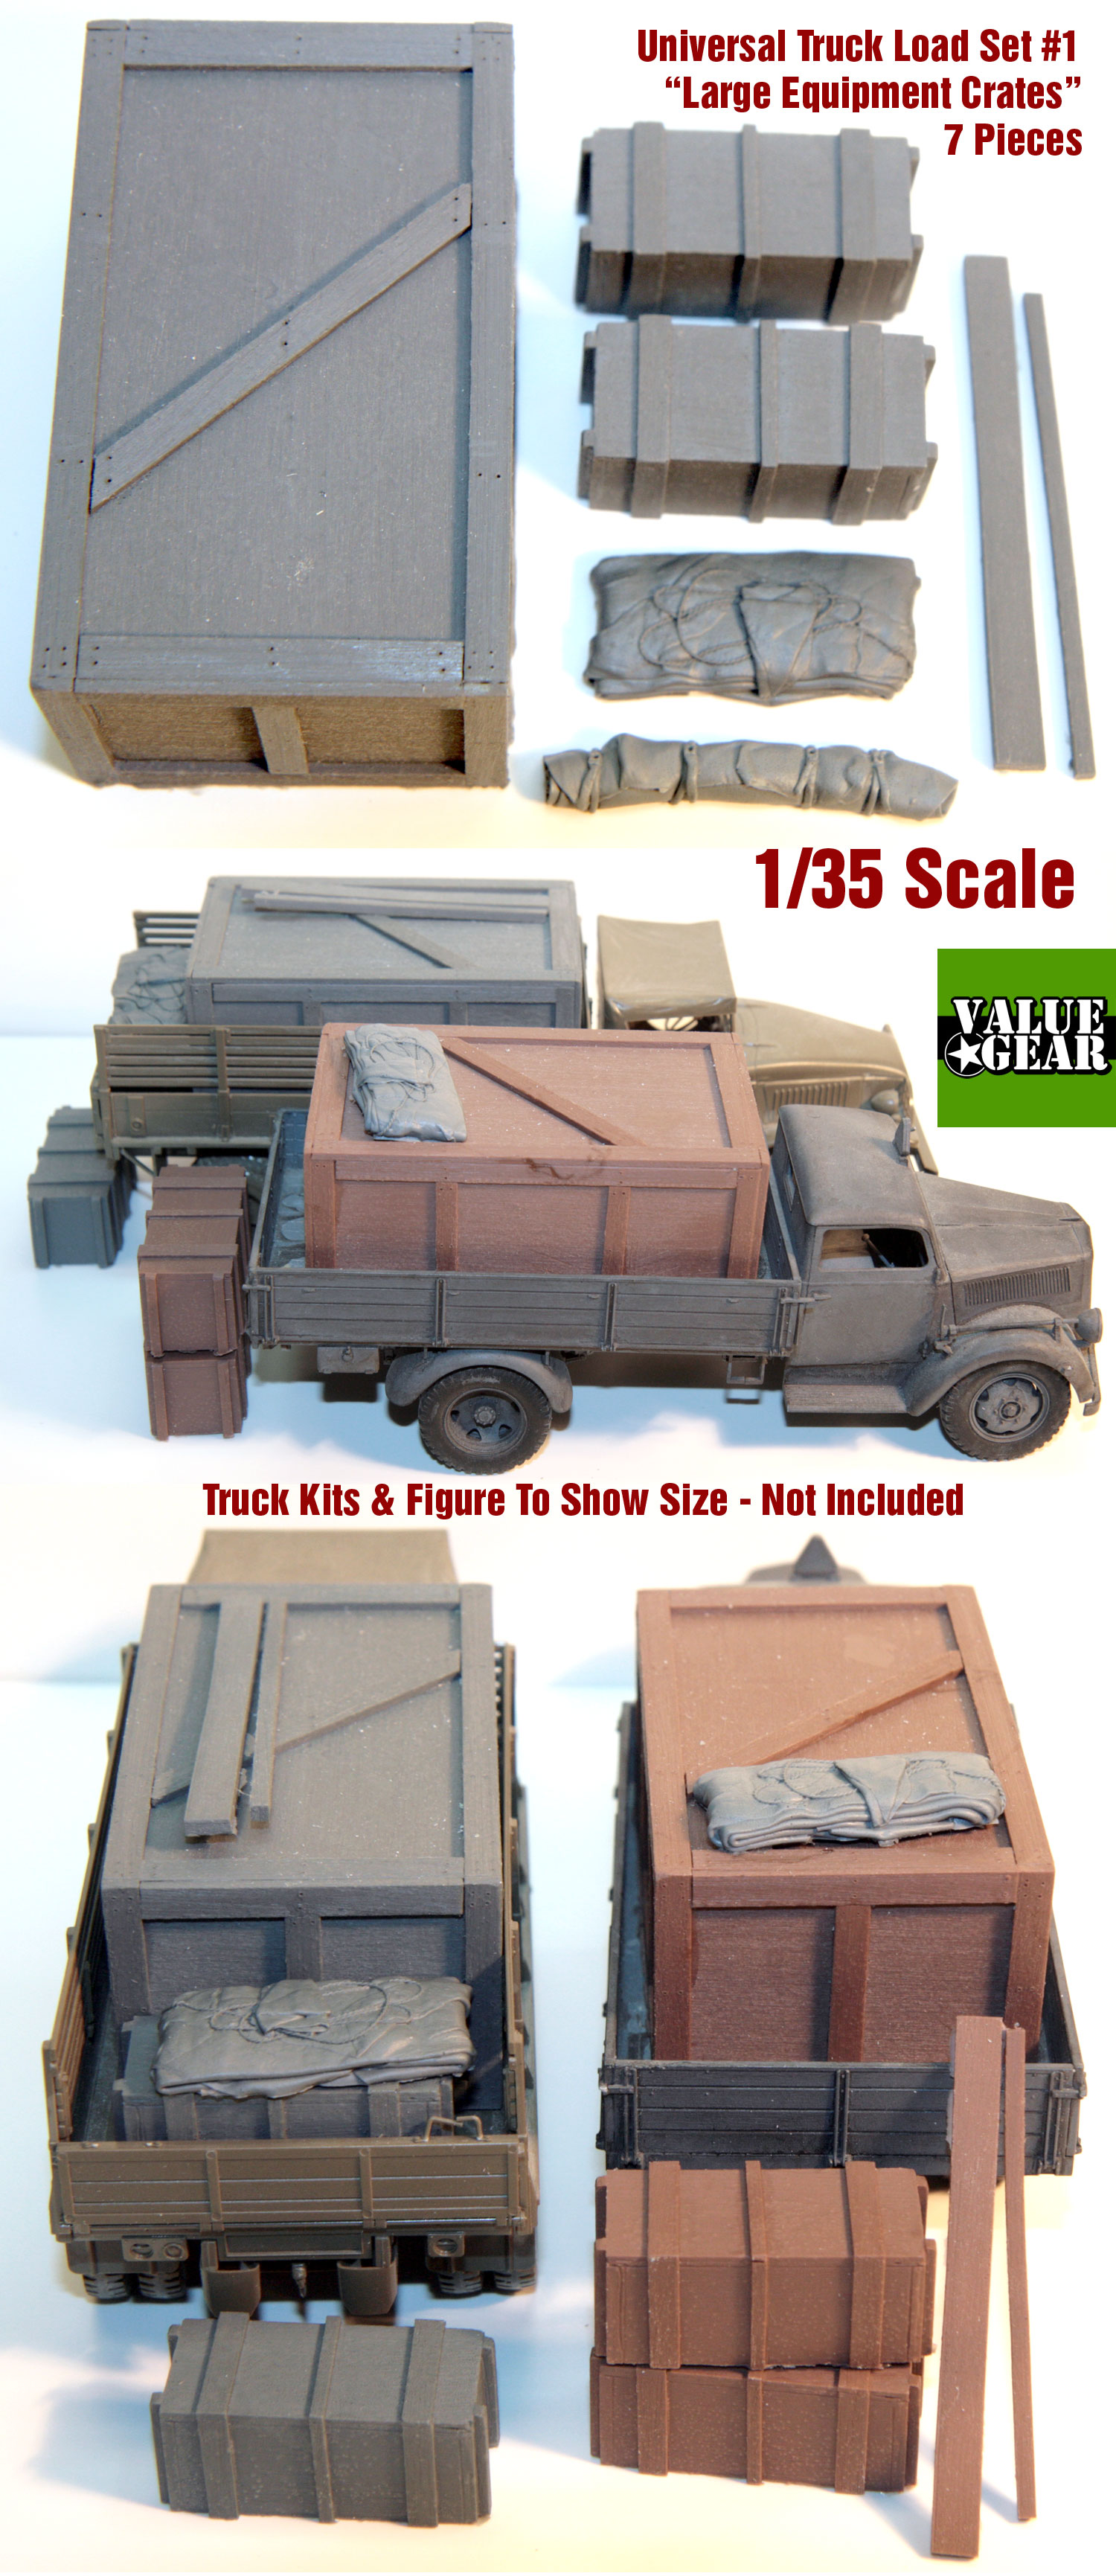 Value Gear 1/35 Universal/Generic Truck Load Set #5 TarpCovered Crates 